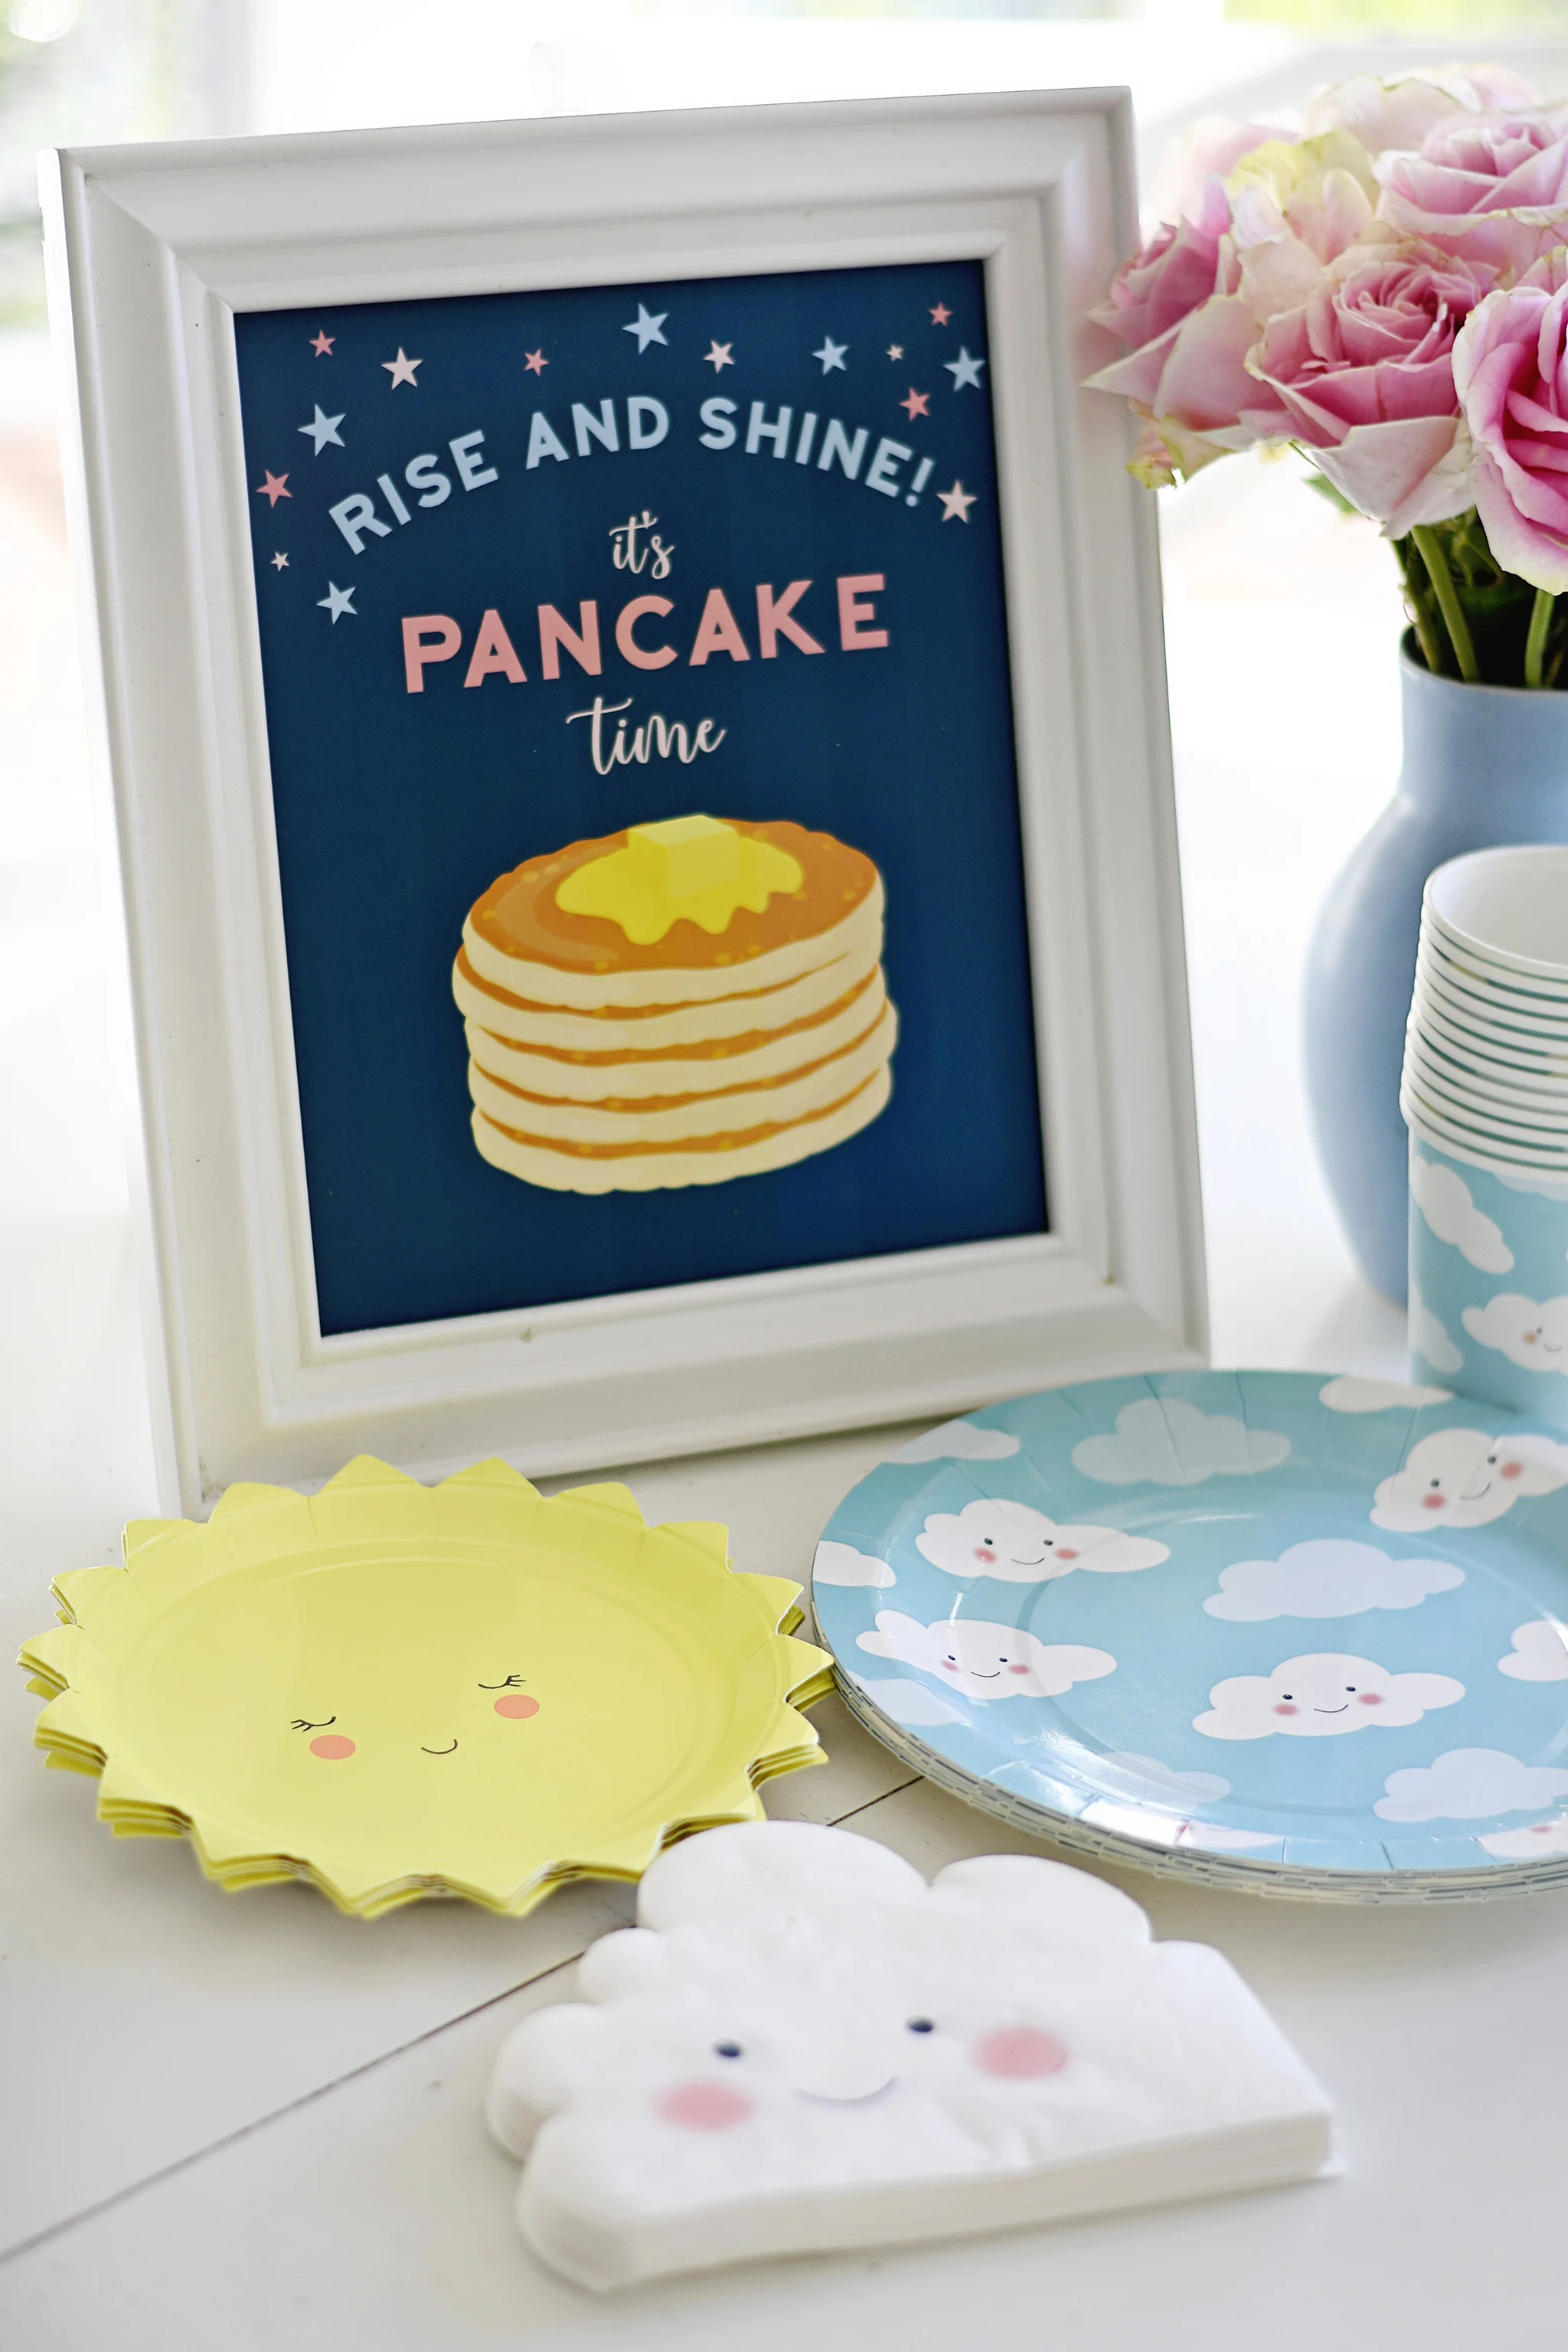 Rise and Shine! It's Pancake Time!